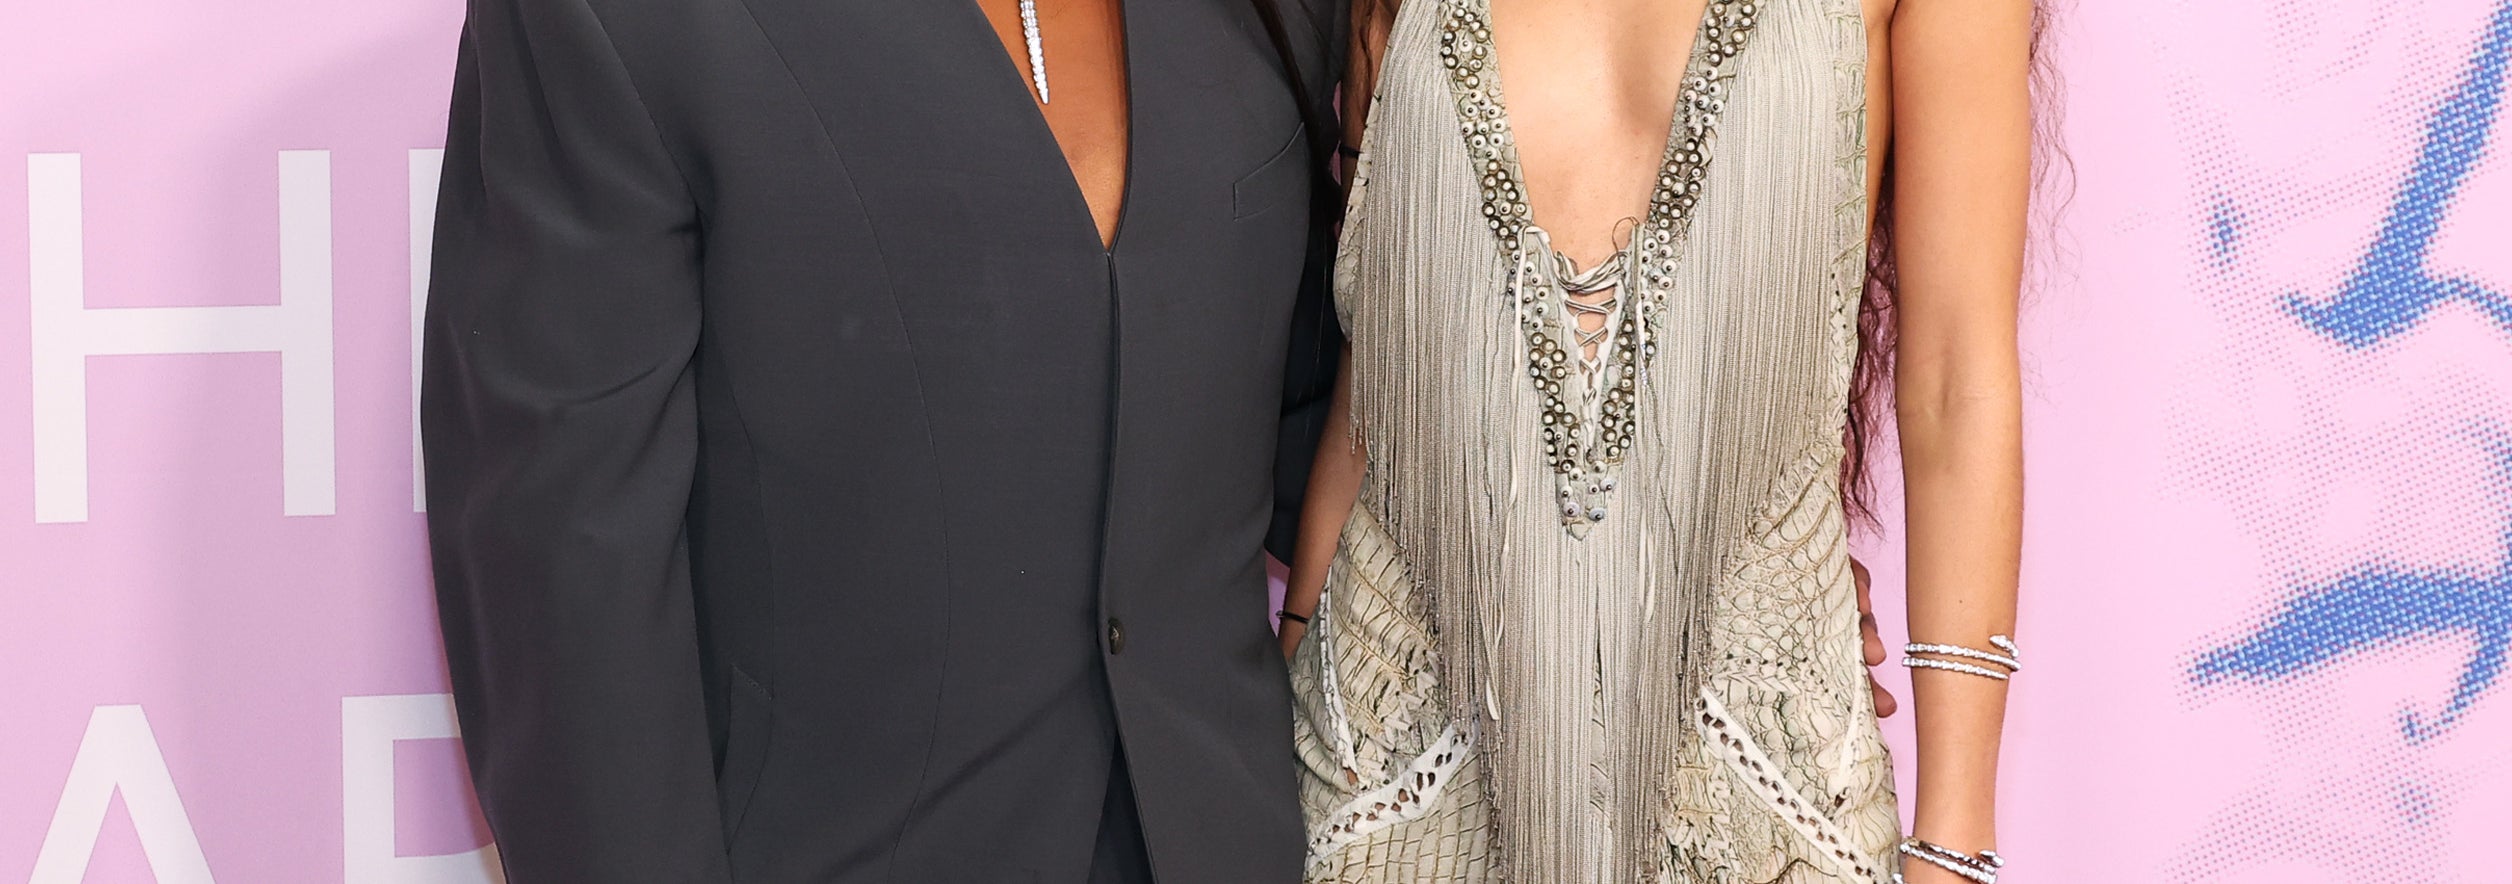 Two individuals posing at an event, one in a gray suit and holding a clutch, the other in a fringe-detailed dress